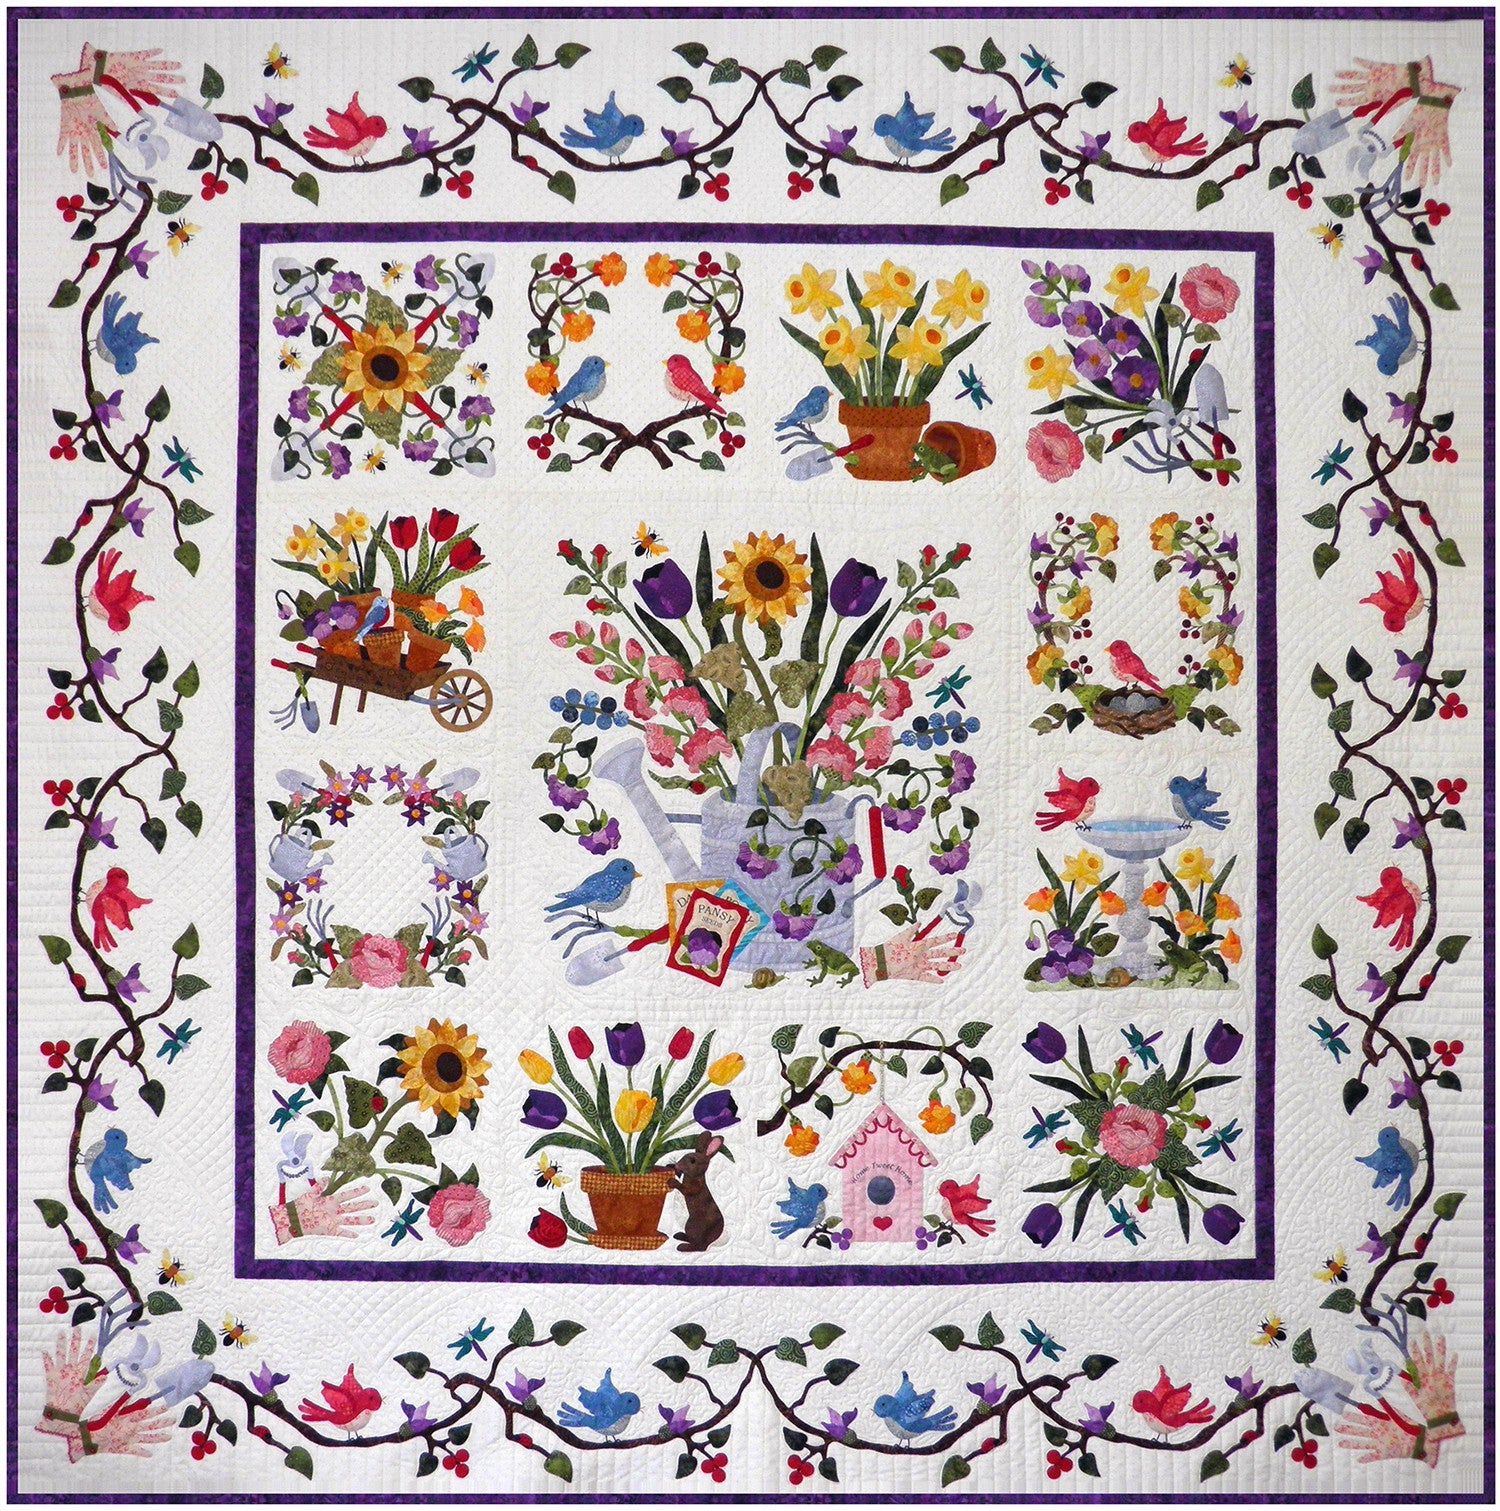 Baltimore Spring Applique Quilt Pattern Set by Pearl P Pereira of P3 Designs